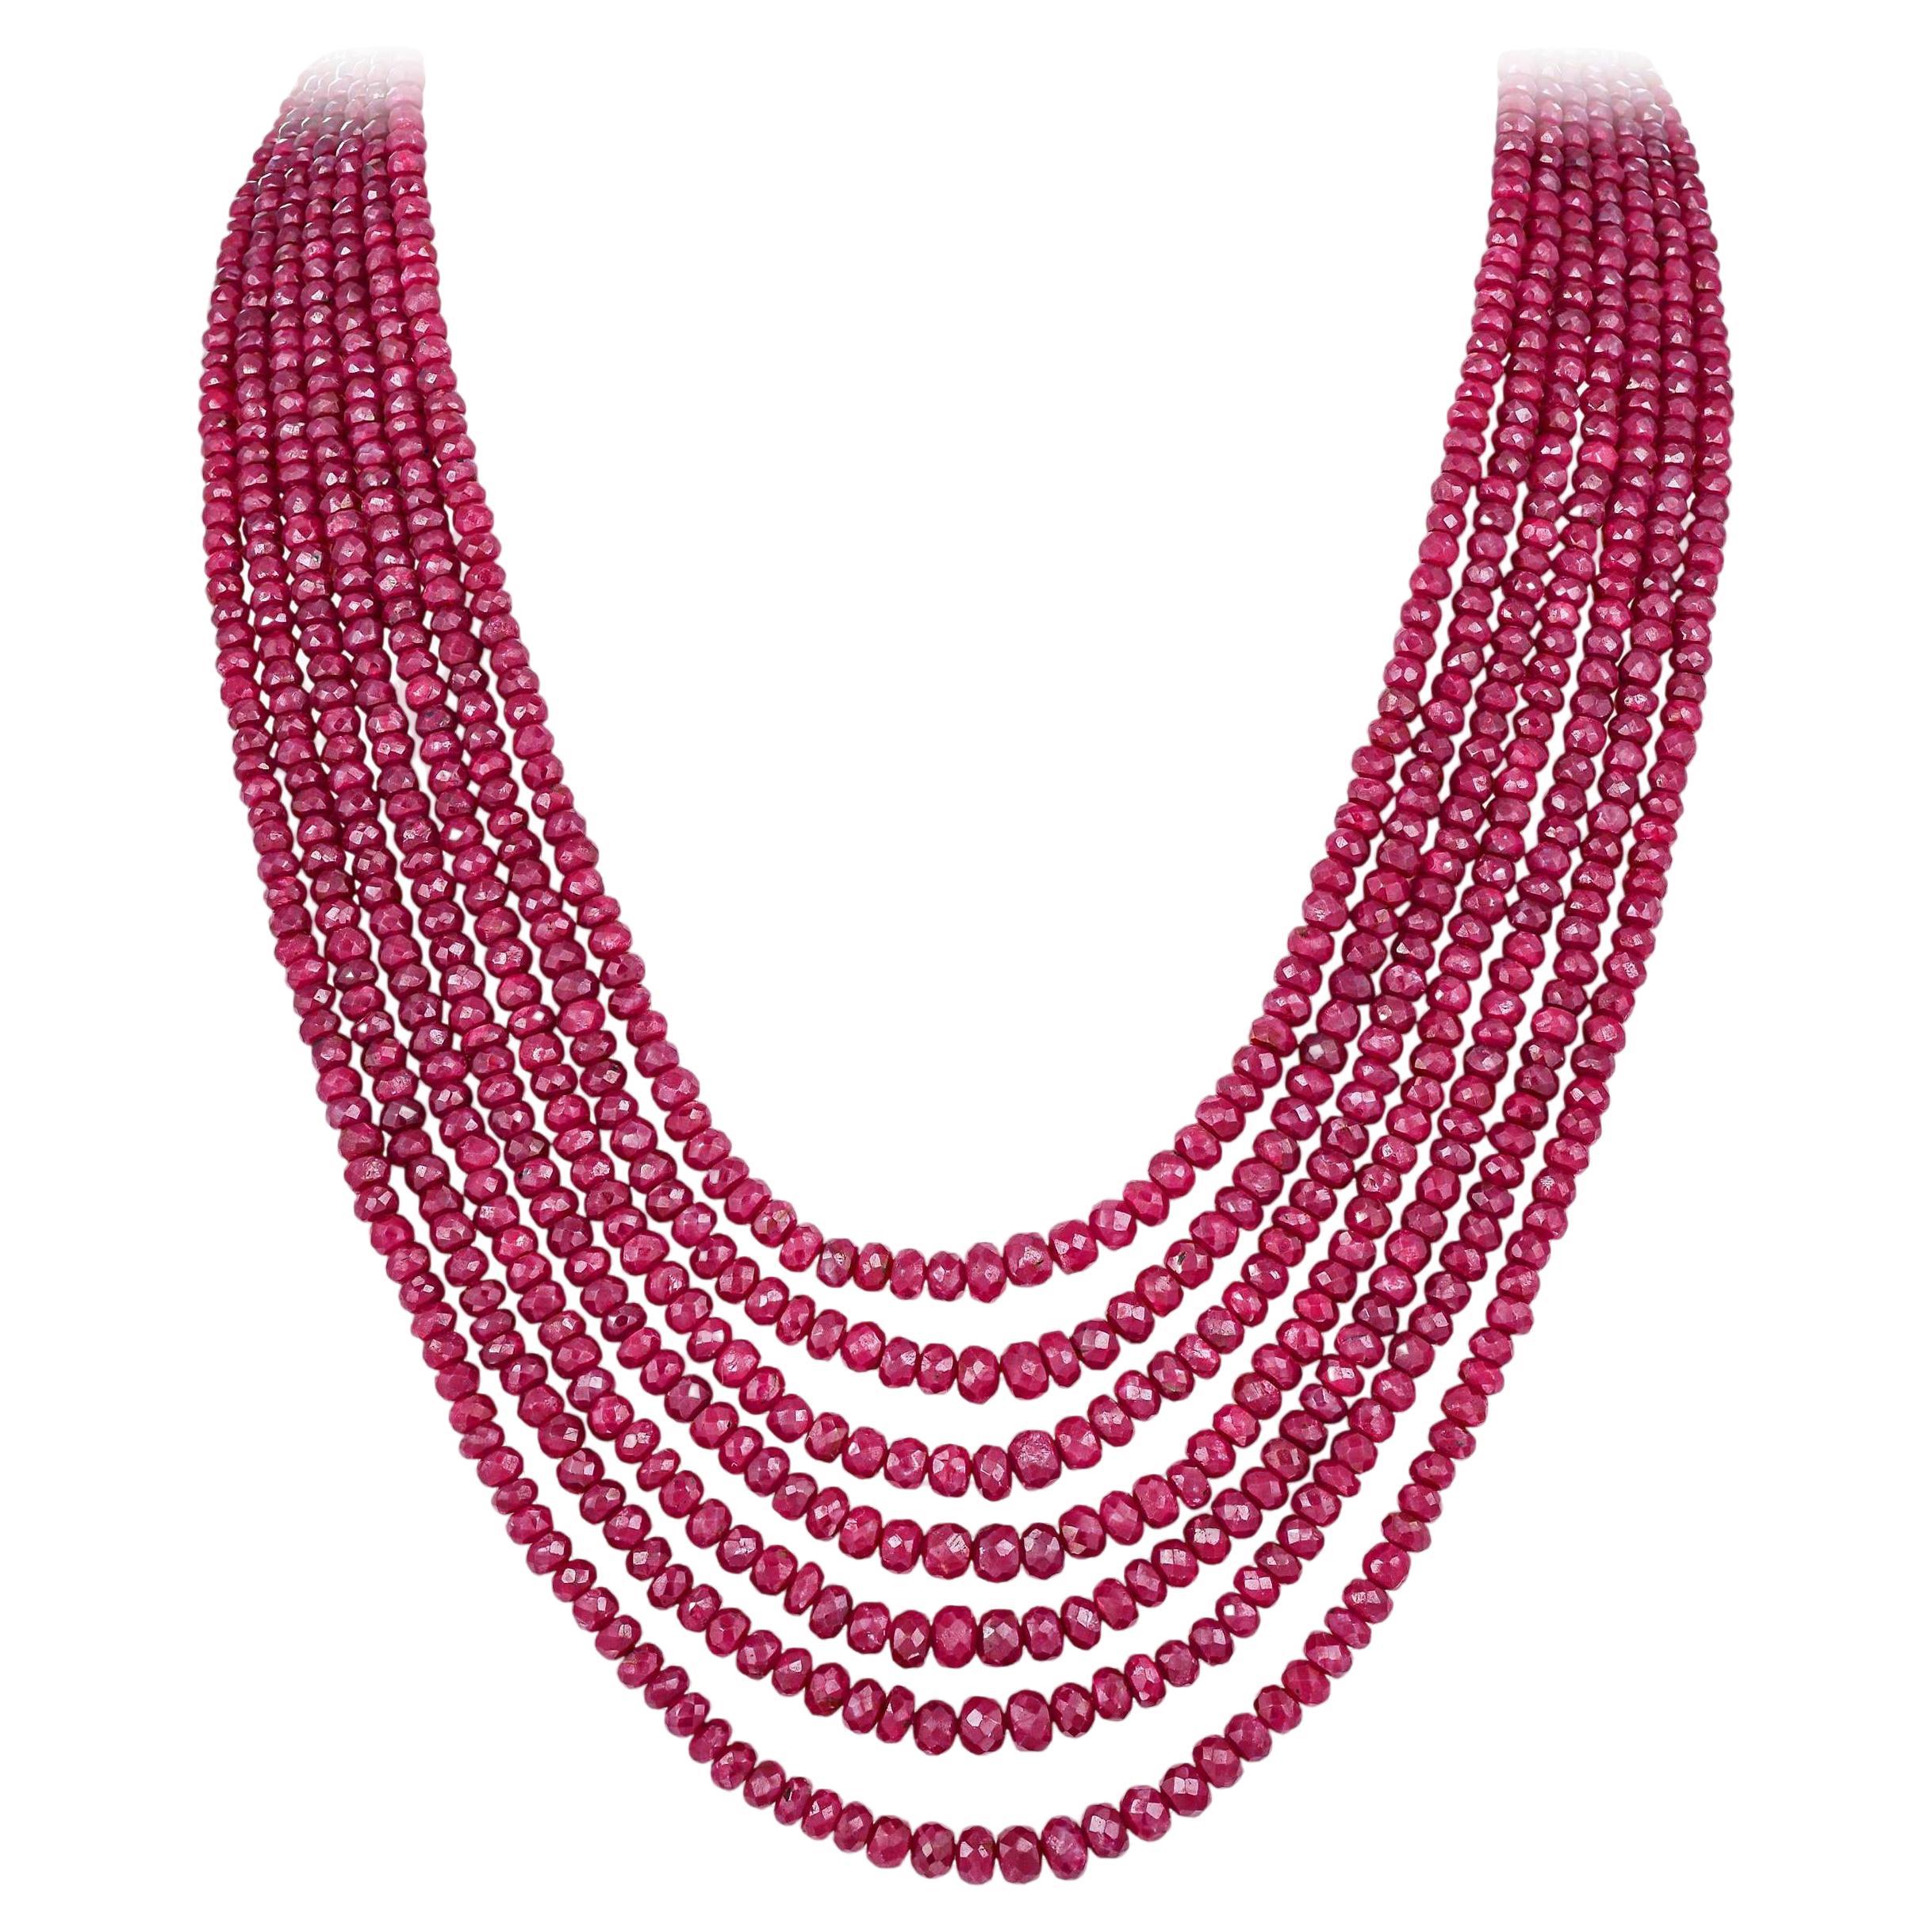 Important 560 Carats Ruby Bead Multi-Strand Necklace 16 Inches For Sale